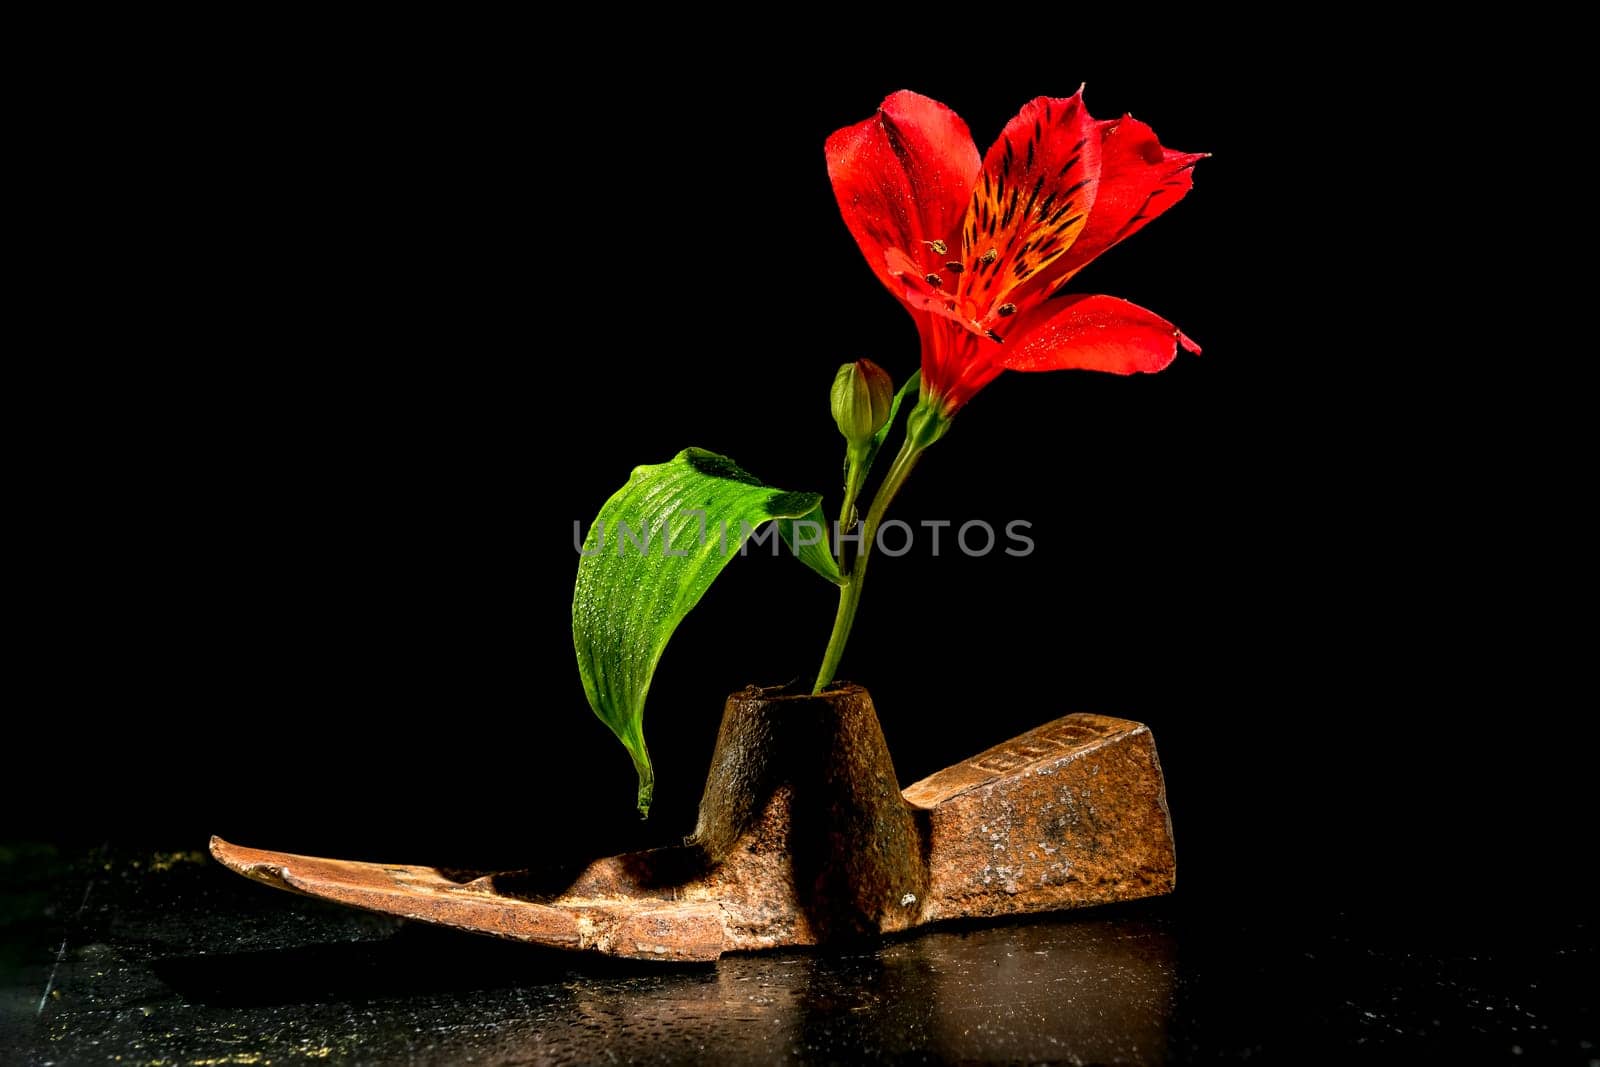 Creative still life with old rusty metal tool and red Alstroemeria flower on a black background